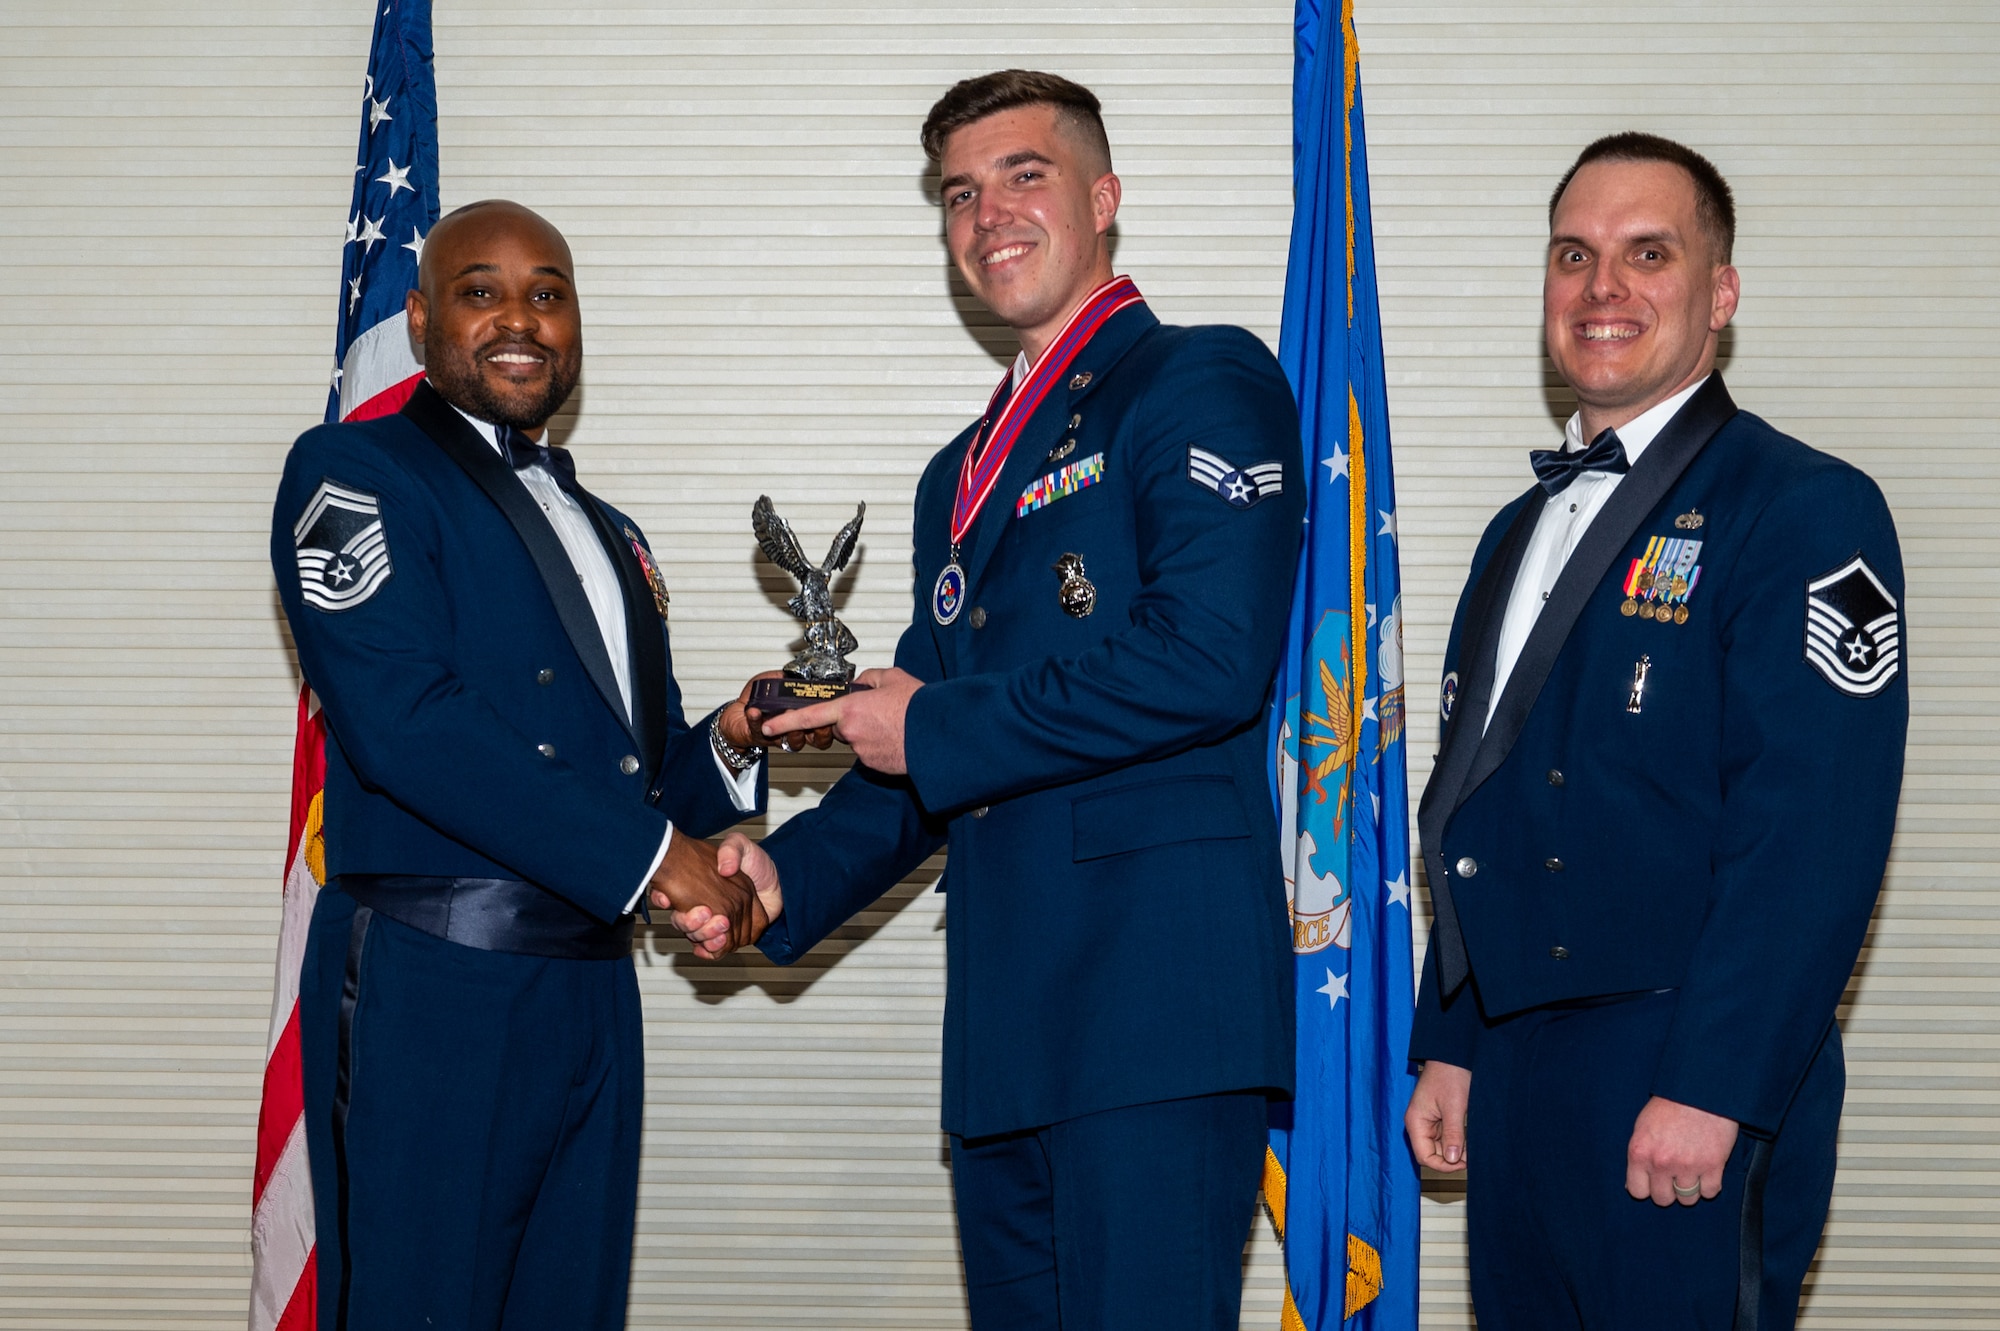 Senior Airman Blake Wyatt, center, assigned to the 4th Security Forces Squadron, receives the Distinguished Graduate Award from Senior Master Sgt. Oliver Missick, 4th Fighter Wing Safety Office superintendent, left, and Master Sgt. Dylan Lightfoot, 4th Munitions Squadron alternate mission equipment section chief, right, during the Airman Leadership School class 24-C graduation ceremony at Seymour Johnson Air Force Base, North Carolina, Mar. 20, 2024. Students who received the Distinguished Graduate Award displayed effective teamwork, academic excellence and leadership skills. (U.S. Air Force photo by Airman Rebecca Tierney)